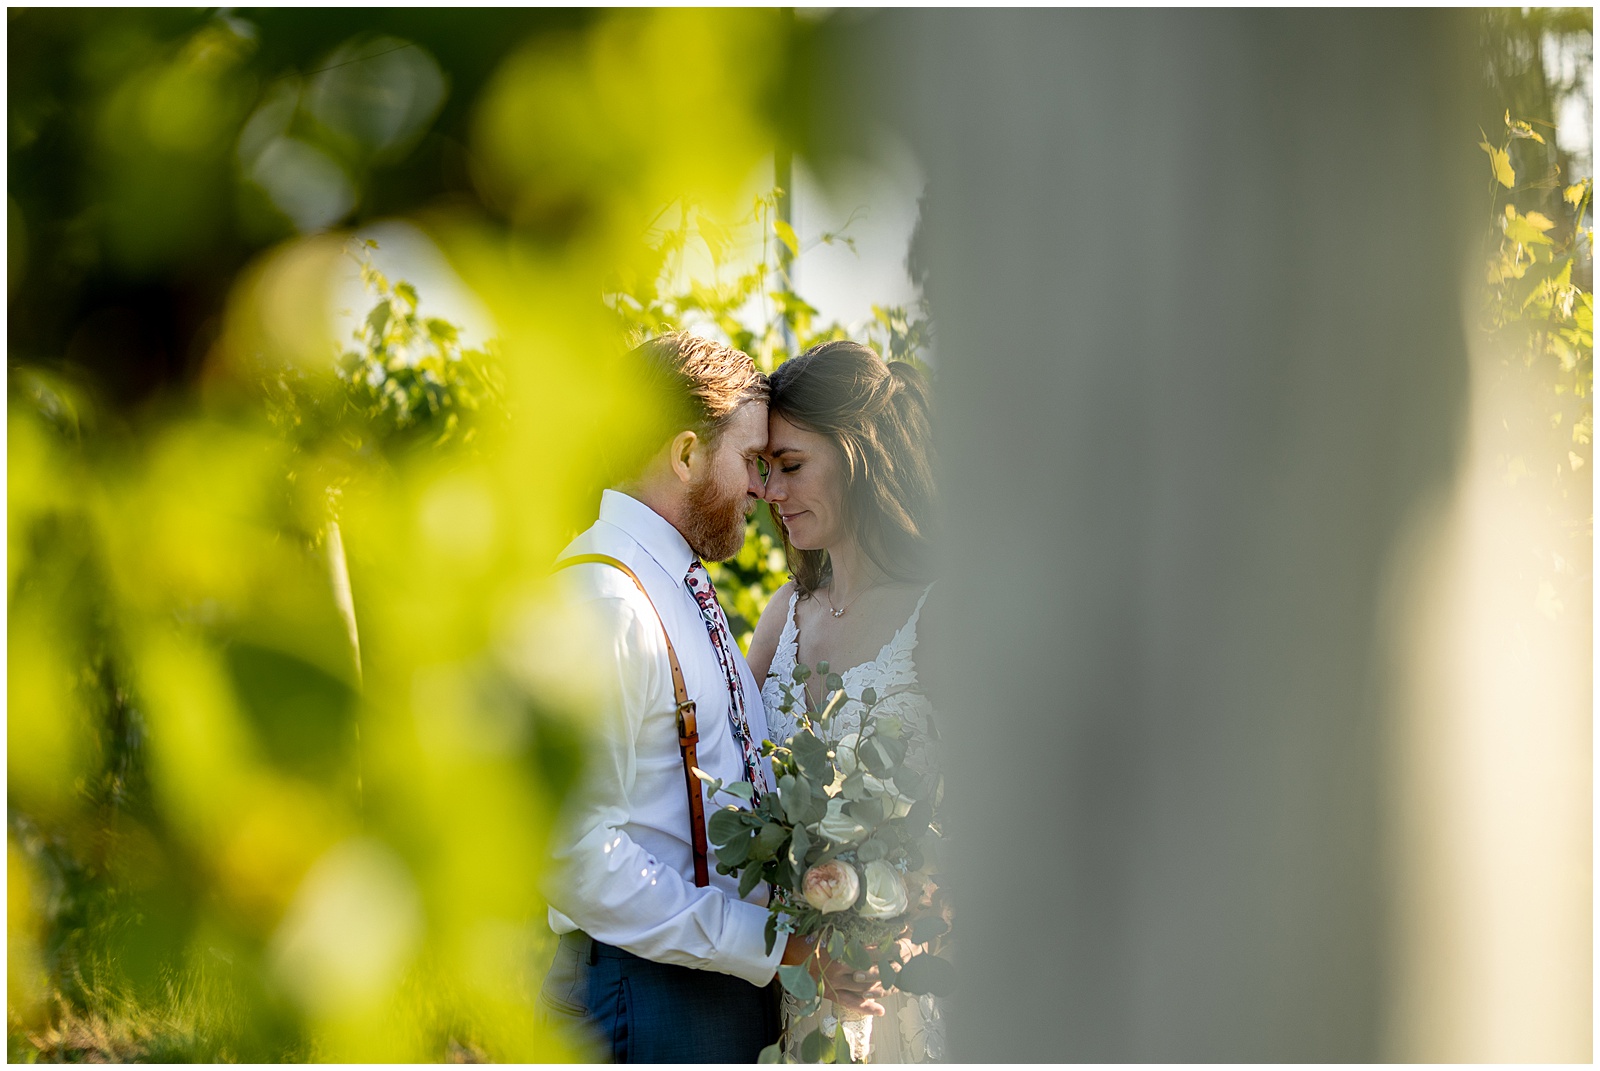 Wedding at Rustic River Winery in Lake View Iowa photographed by Iowa wedding photographer